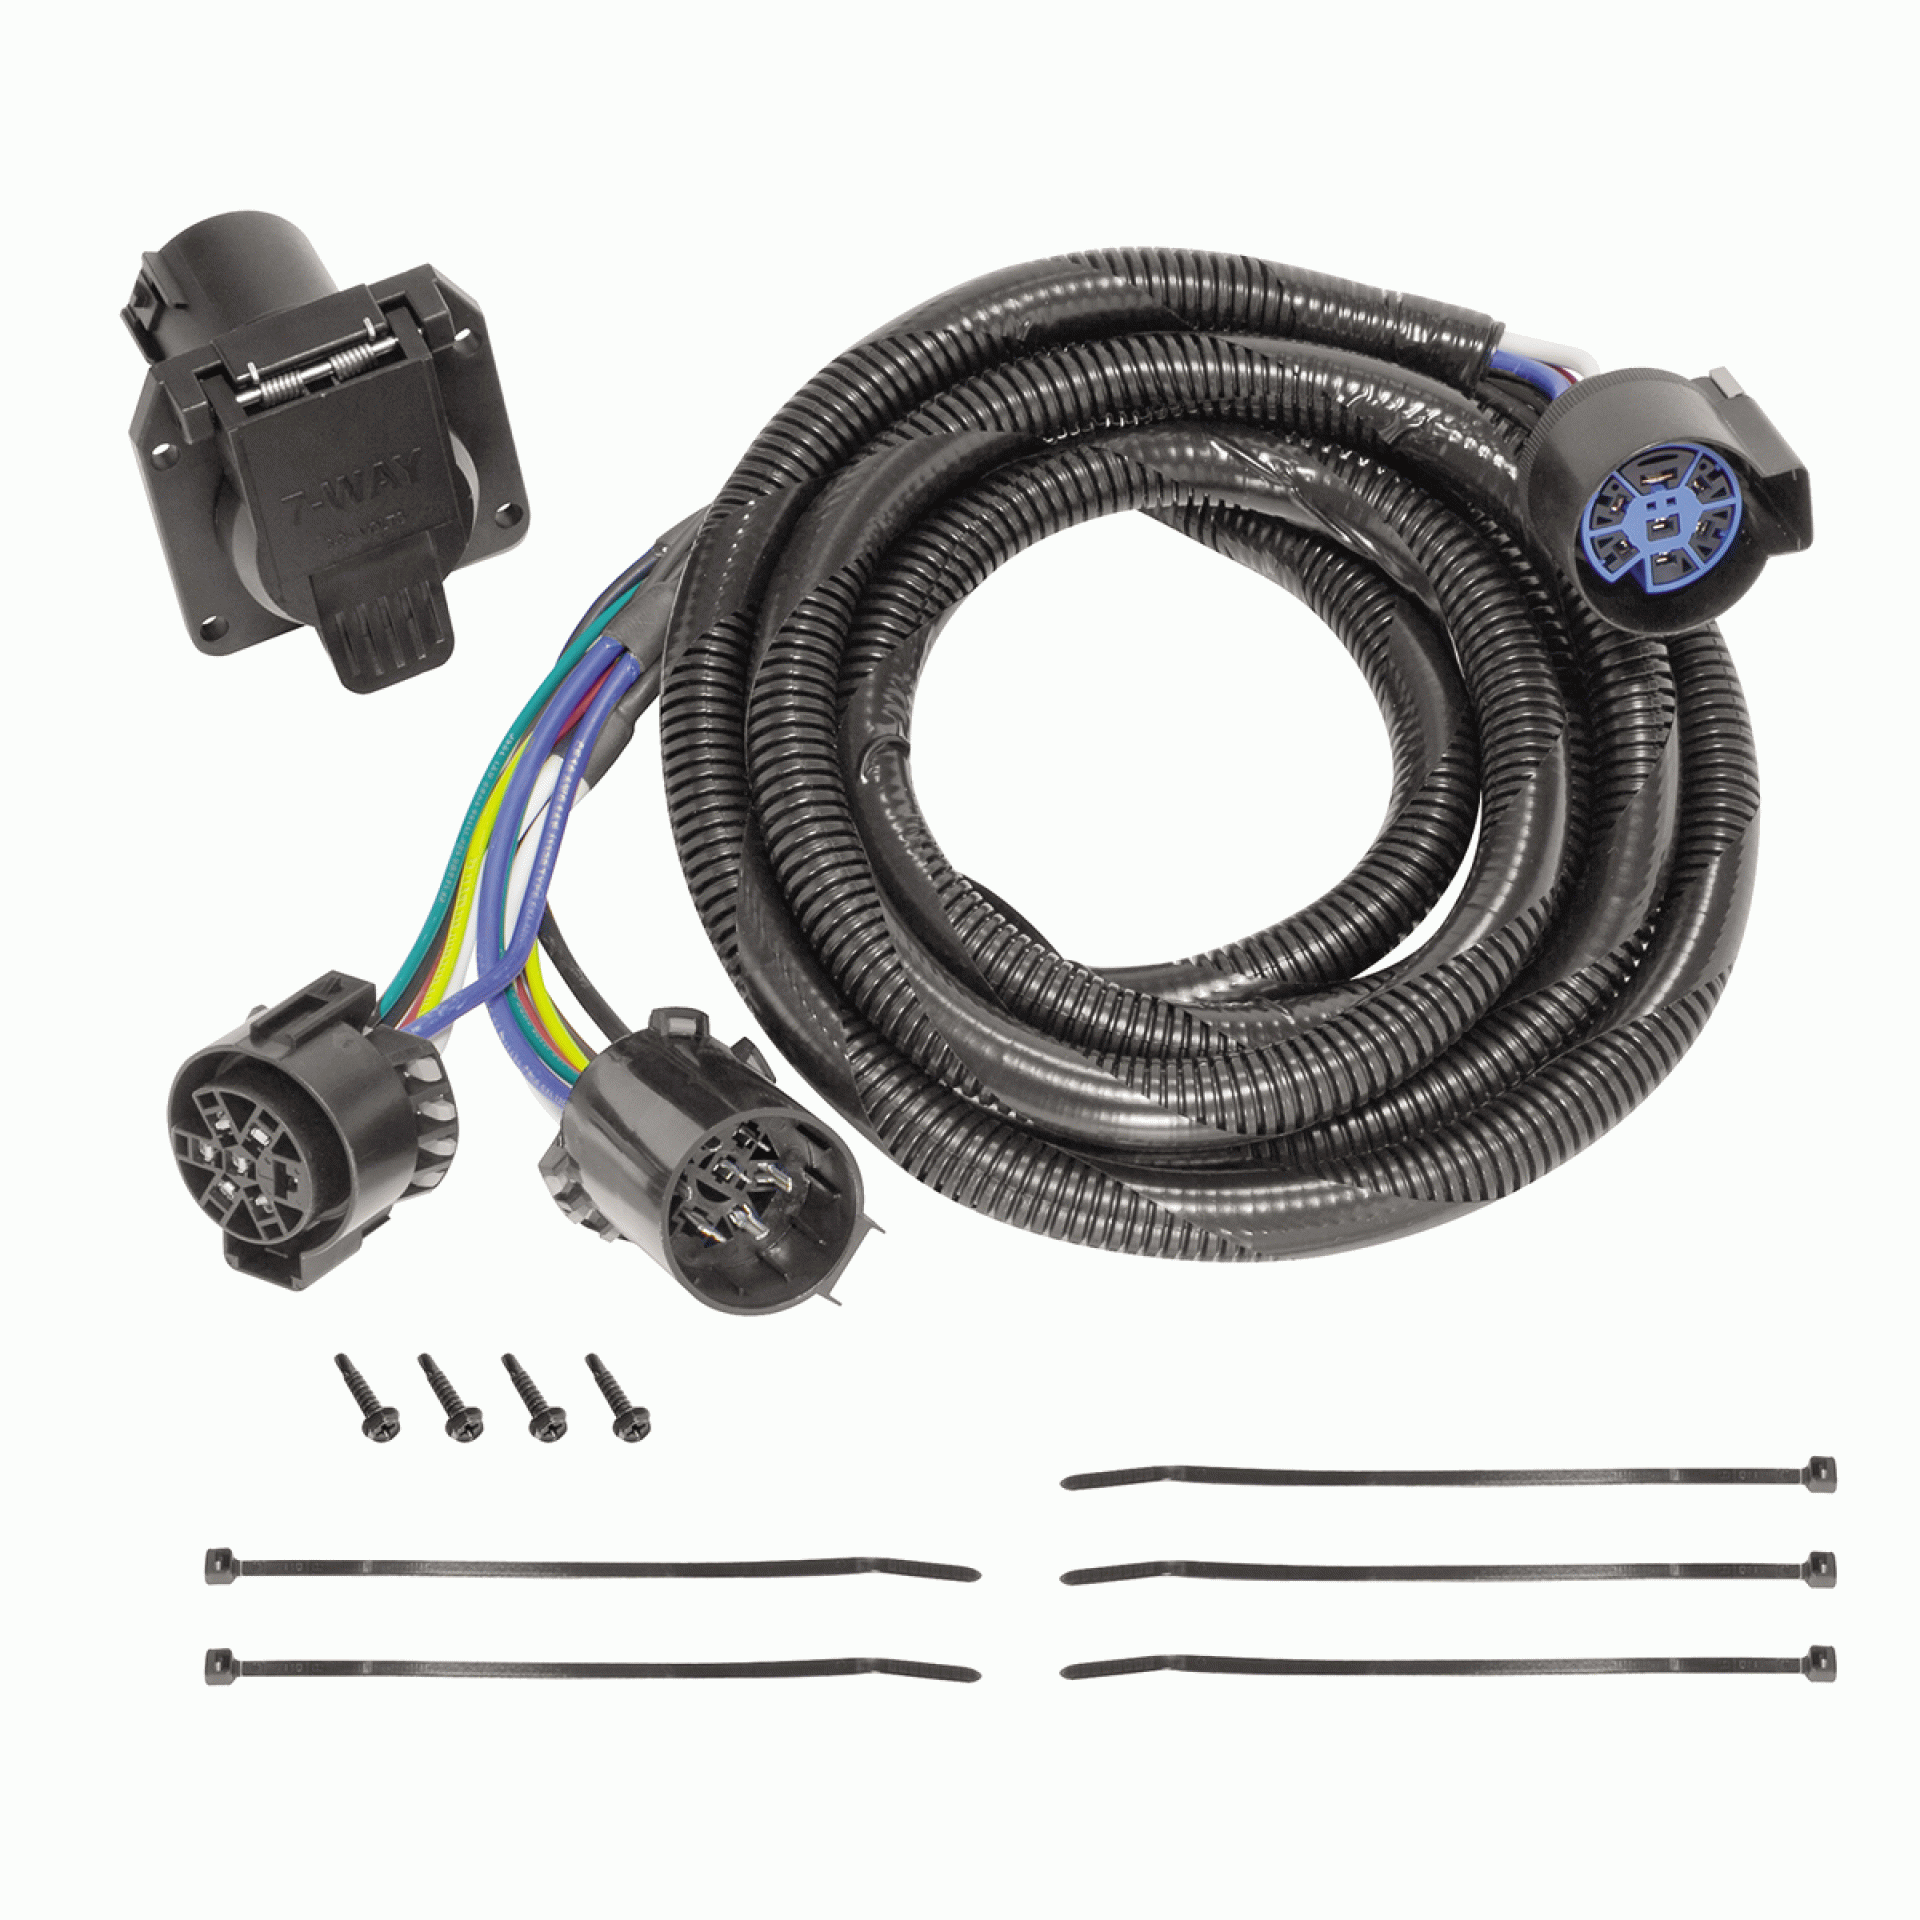 REESE | 20146 | WIRING HARNESS 5TH WHEEL ADAPTER 9'